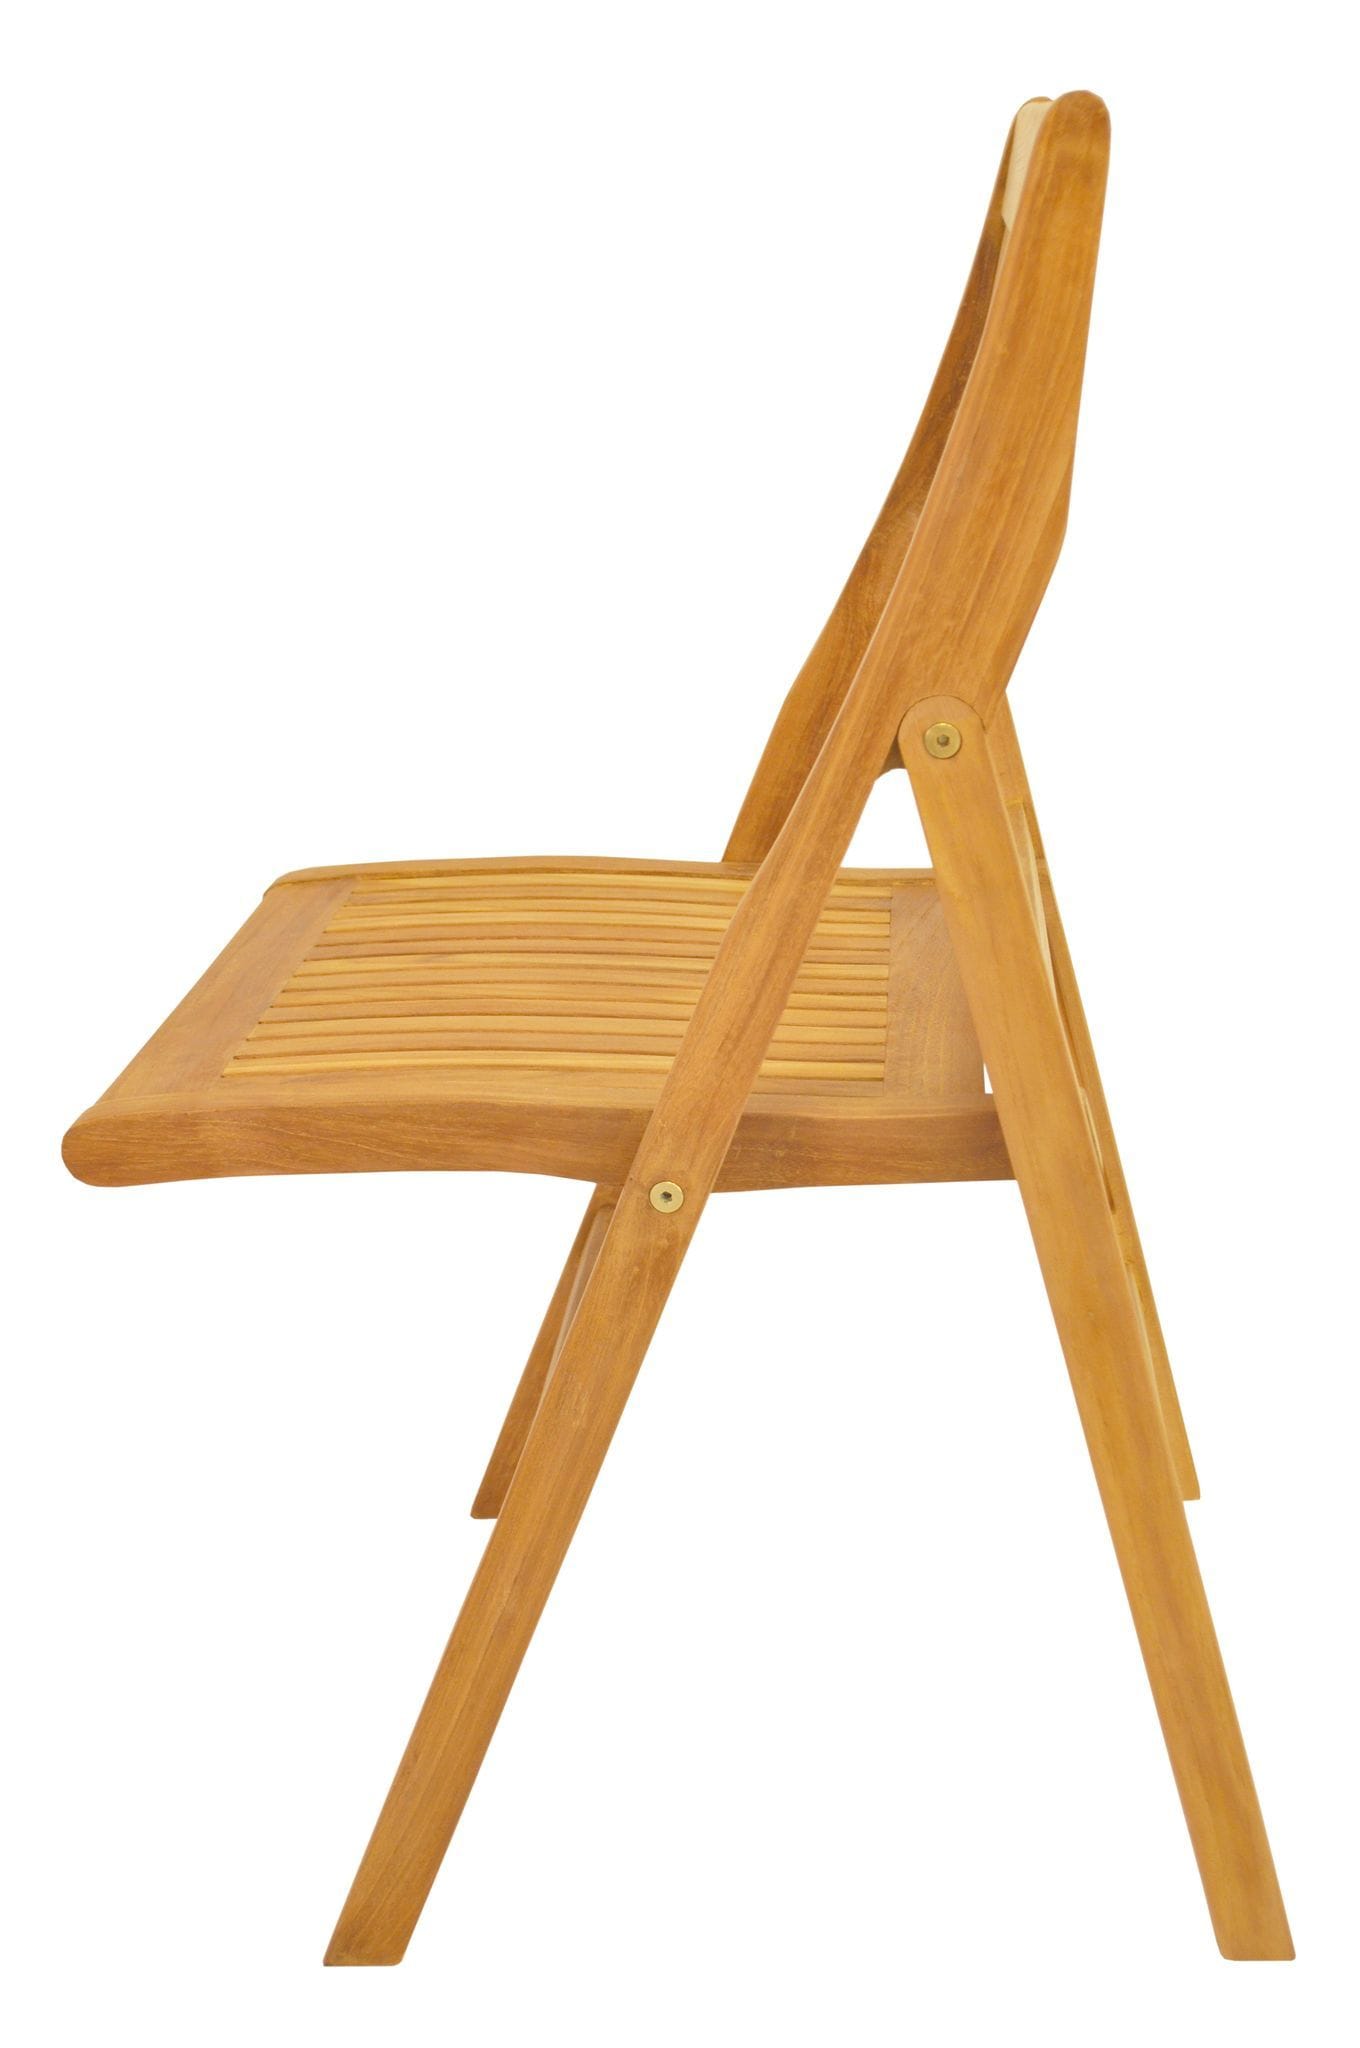 Anderson Teak Outdoor Folding Chairs Anderson Teak Windsor Folding Chair (sell & price per 2 chairs only)